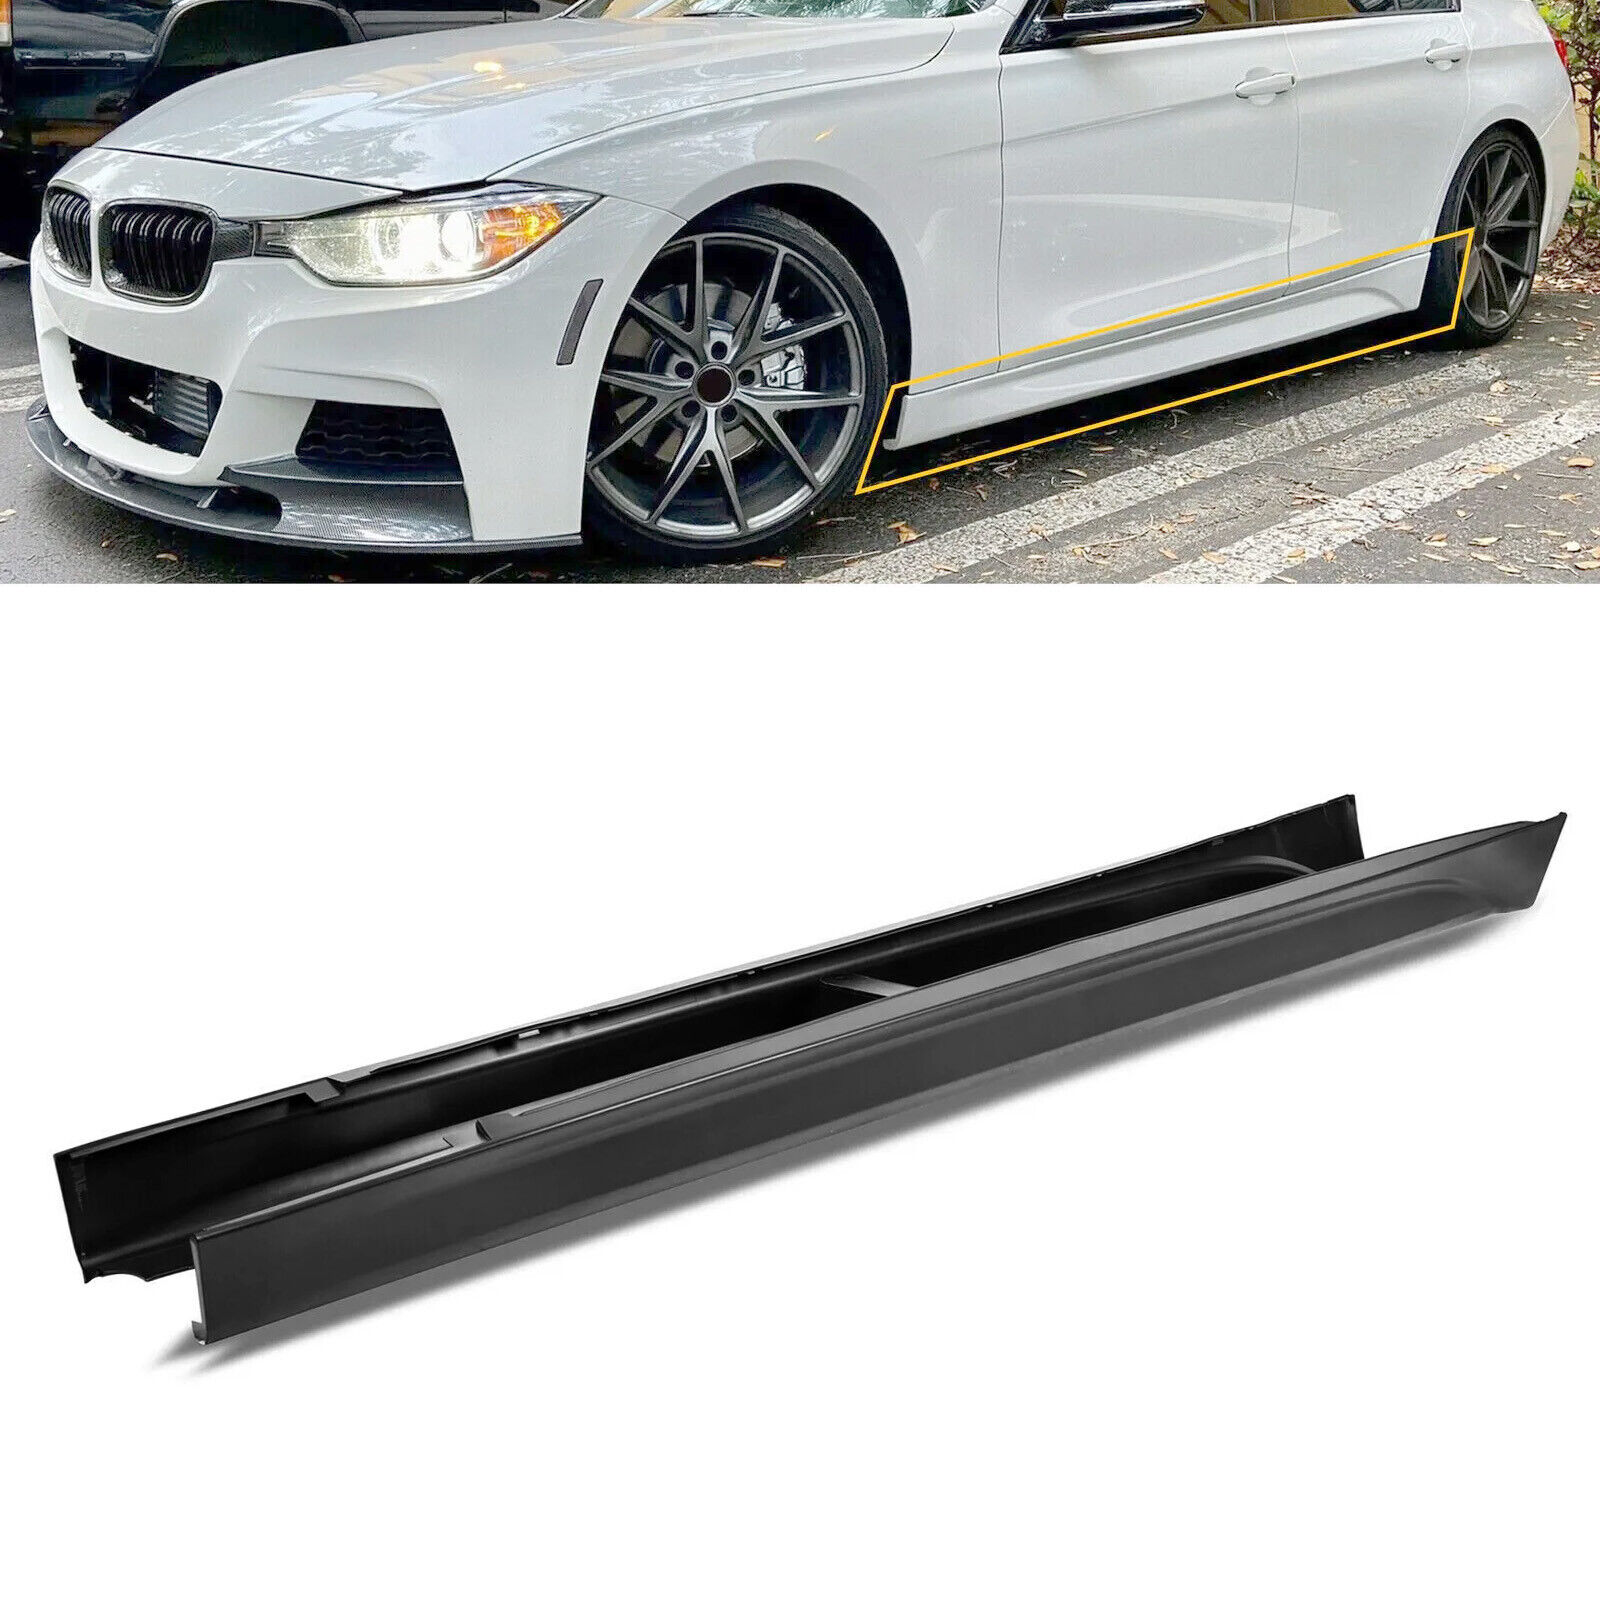 For 12-18 F30 F31 M SPORT SIDE SKIRTS EXTENSION PAIR FOR ALL BMW 3 SERIES SEDAN